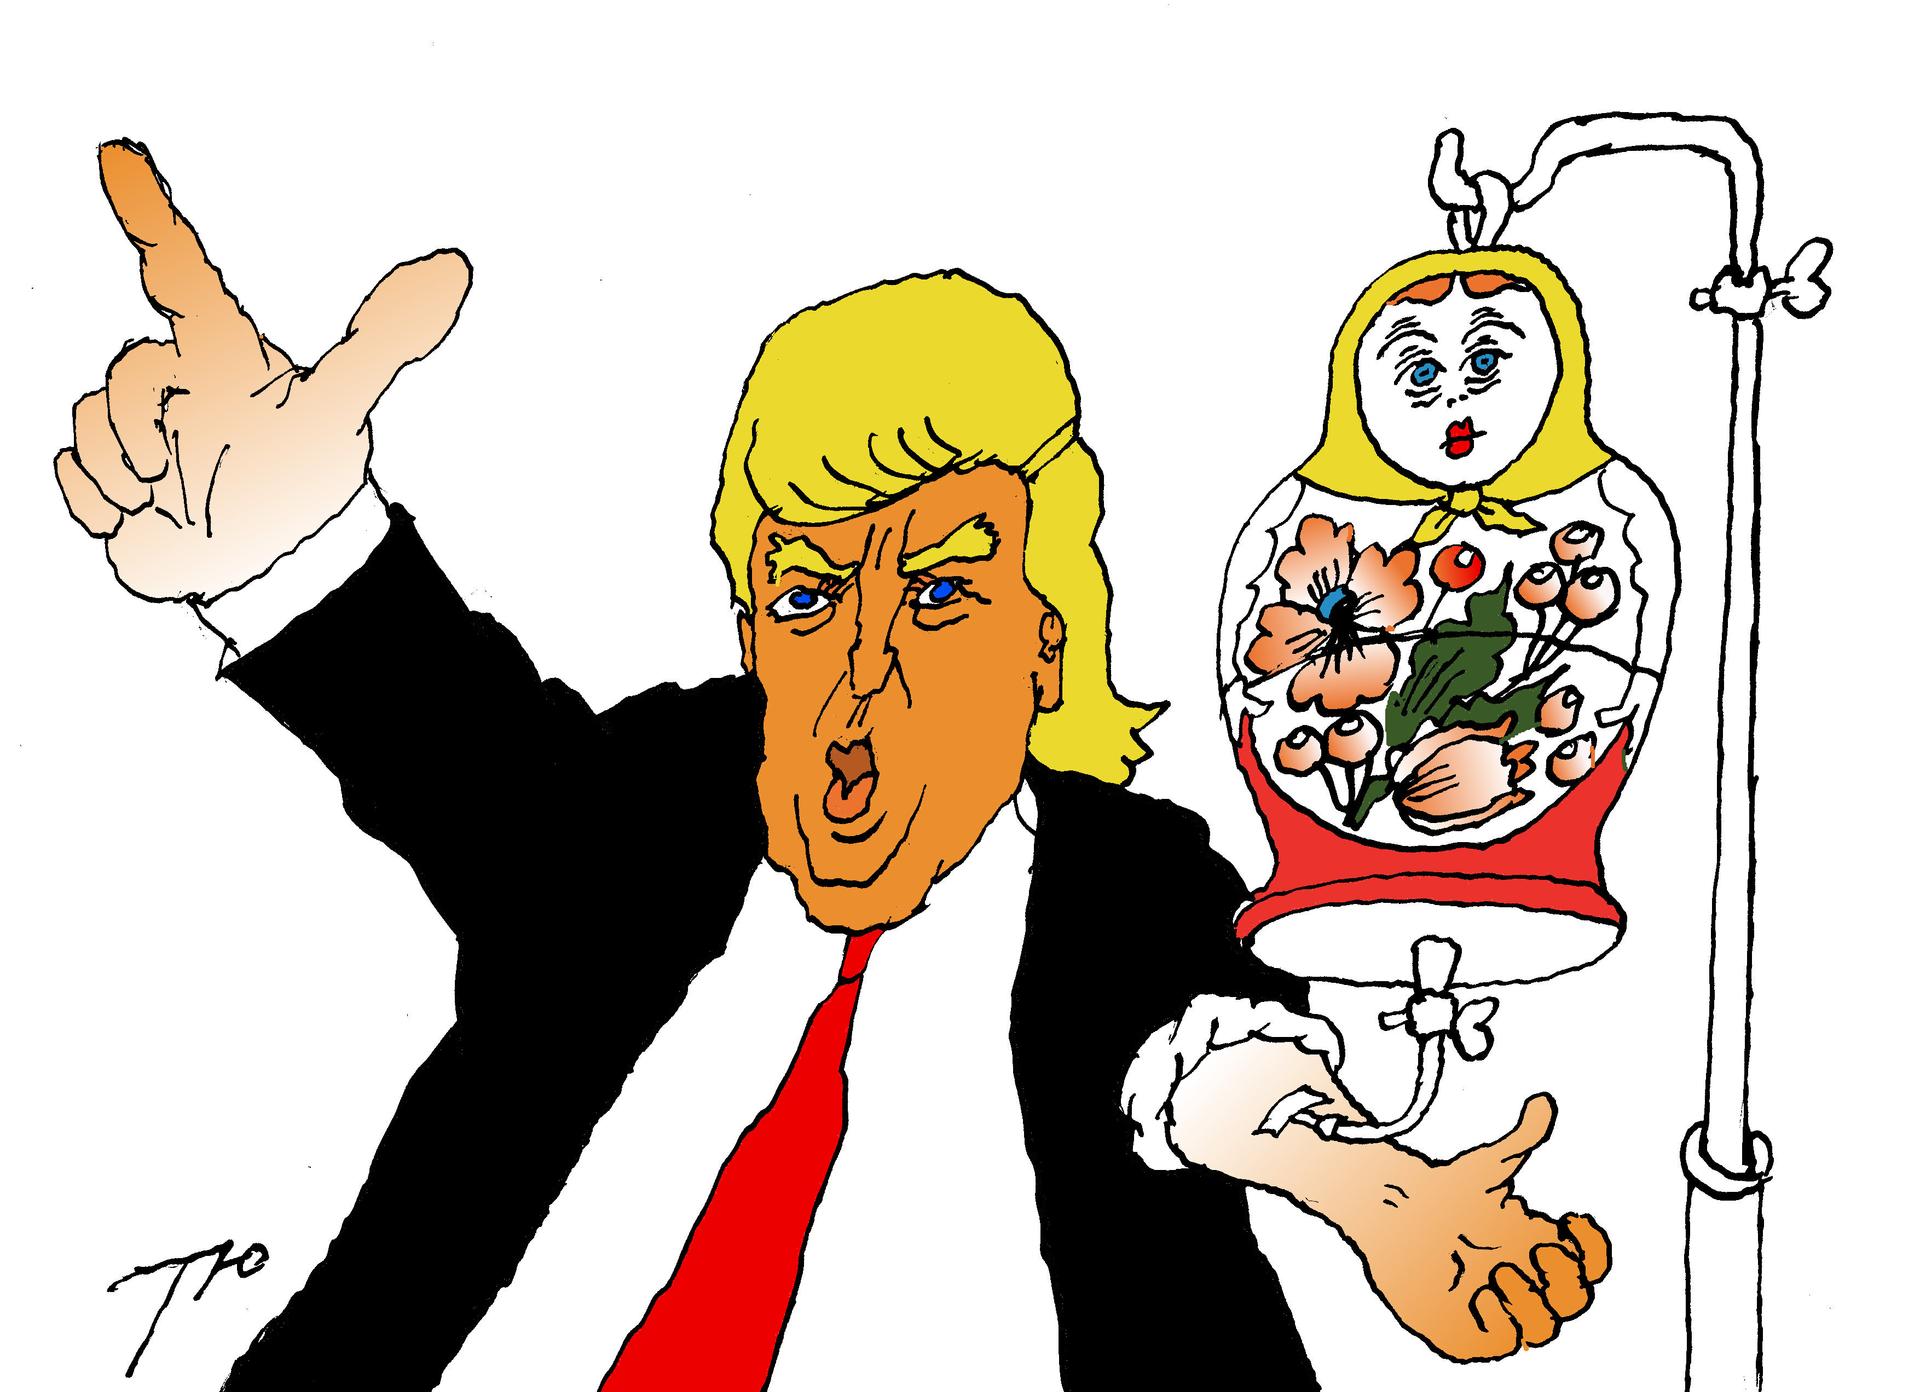 Cartoon of Trump hooked up to an IV which is connected to a Russian nest doll